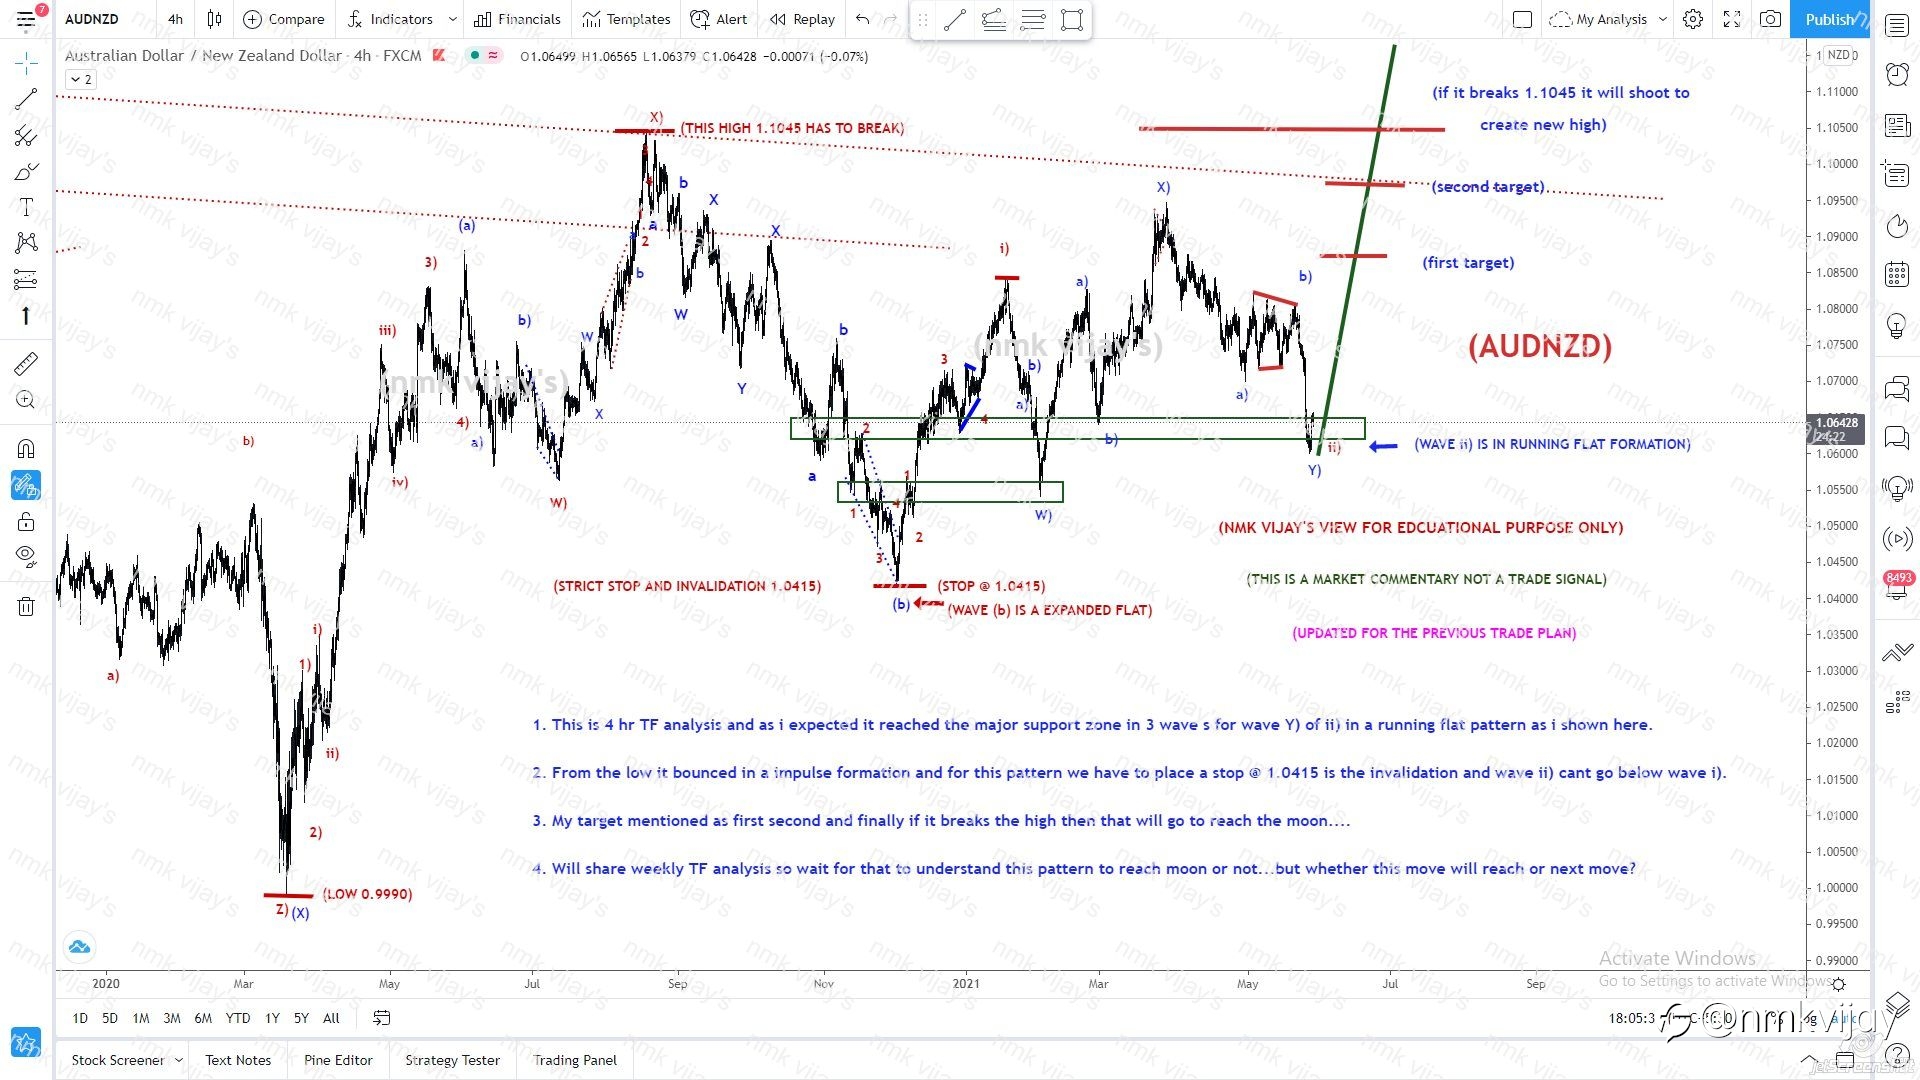 AUDNZD-Reached my buy zone, whether this wave will reach to moon ?